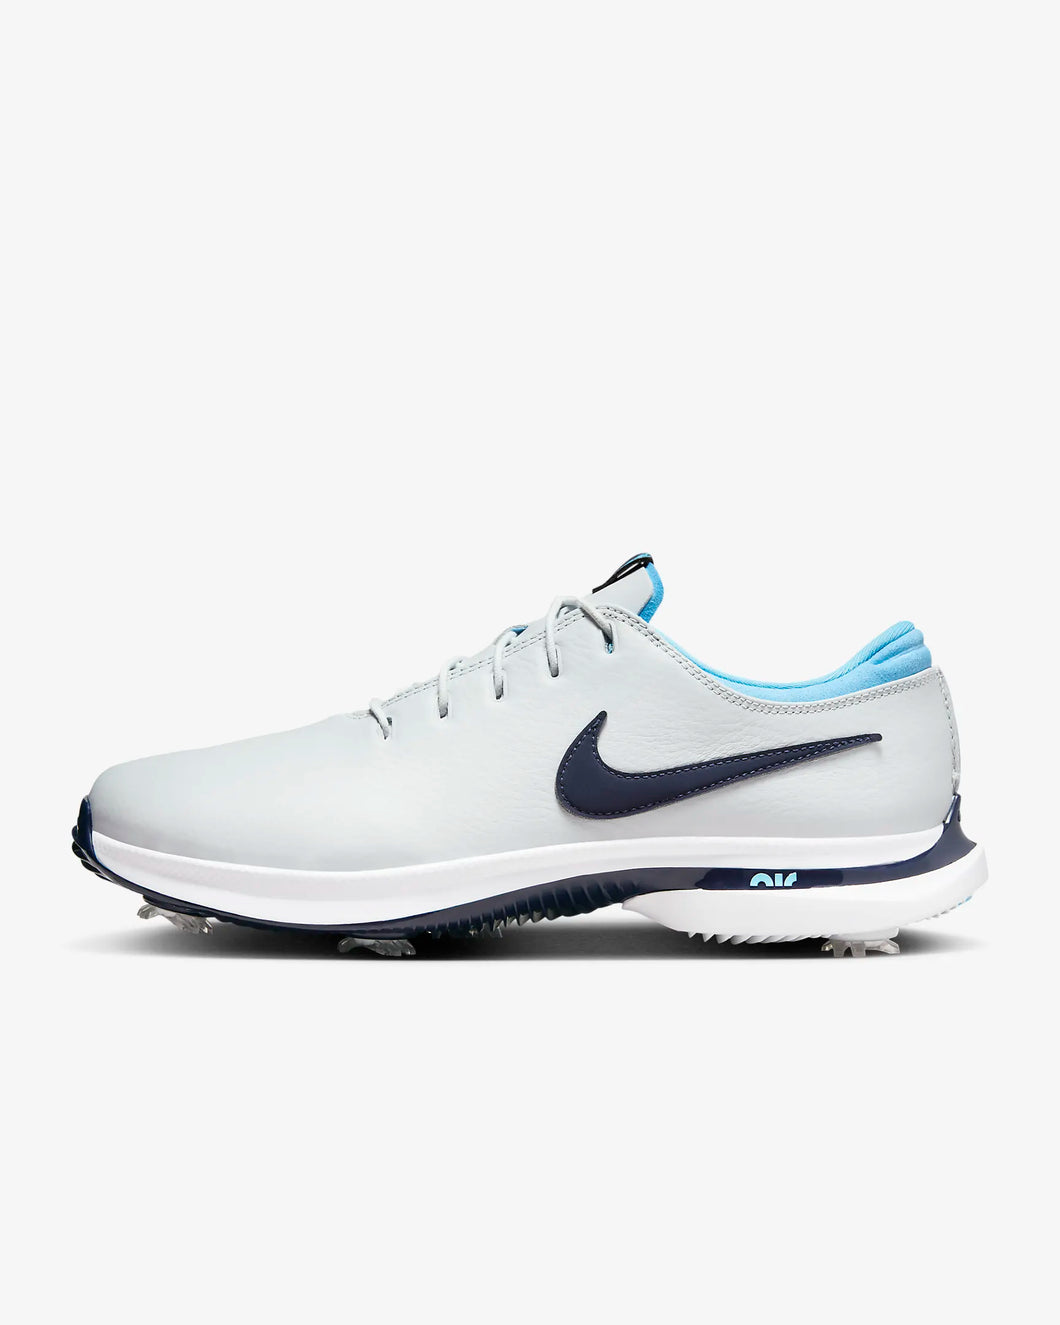 Nike Air Zoom Victory Tour 3 Spiked Men's Golf Shoes